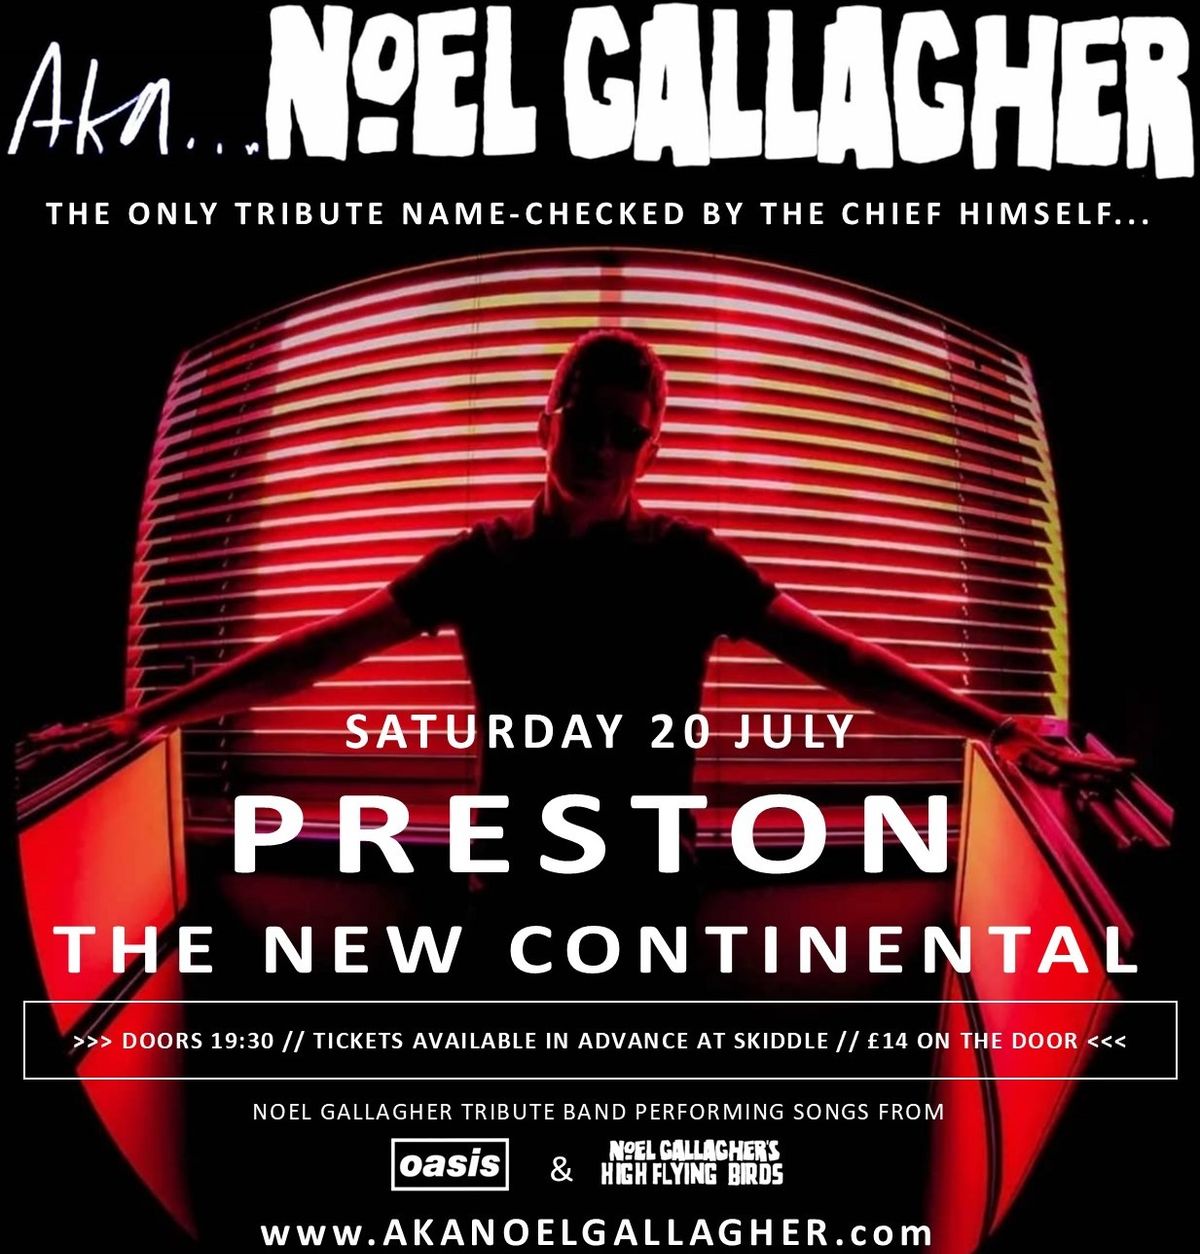 AKA Noel Gallagher at The New Continental